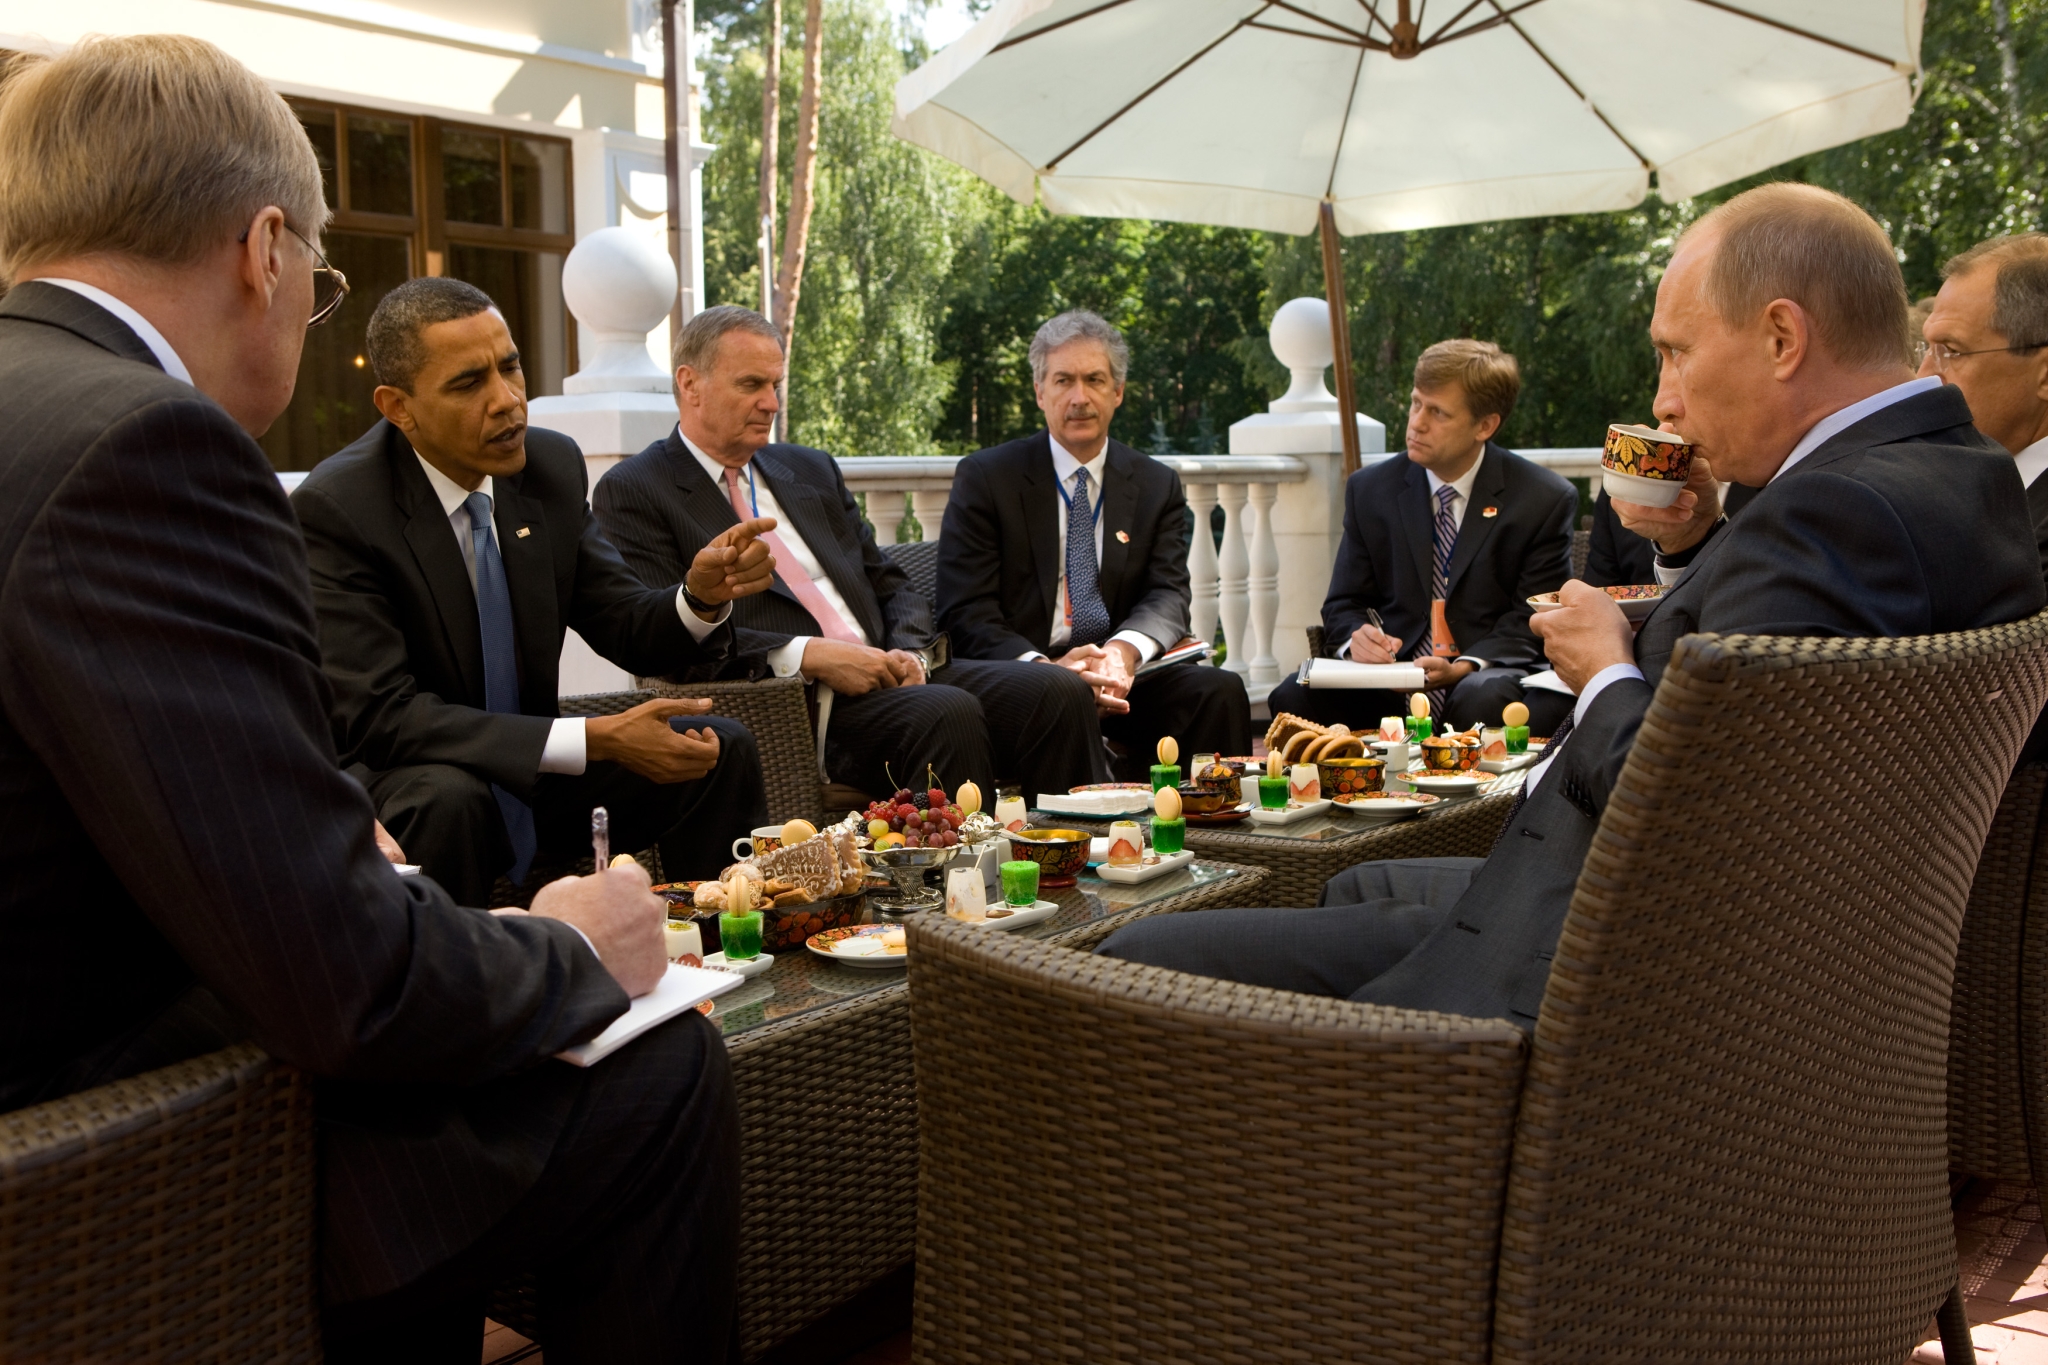 President Barack Obama and members of the American delegation, including National Security Advisor General Jim Jones, Under Secretary for Political Affairs Bill Burns, and NSC Senior Director for Russian Affairs Mike McFaul, meet with Prime Minister Vladimir Putin at his dacha outside Moscow, Russia, July 7, 2009.  (Official White House Photo by Pete Souza)